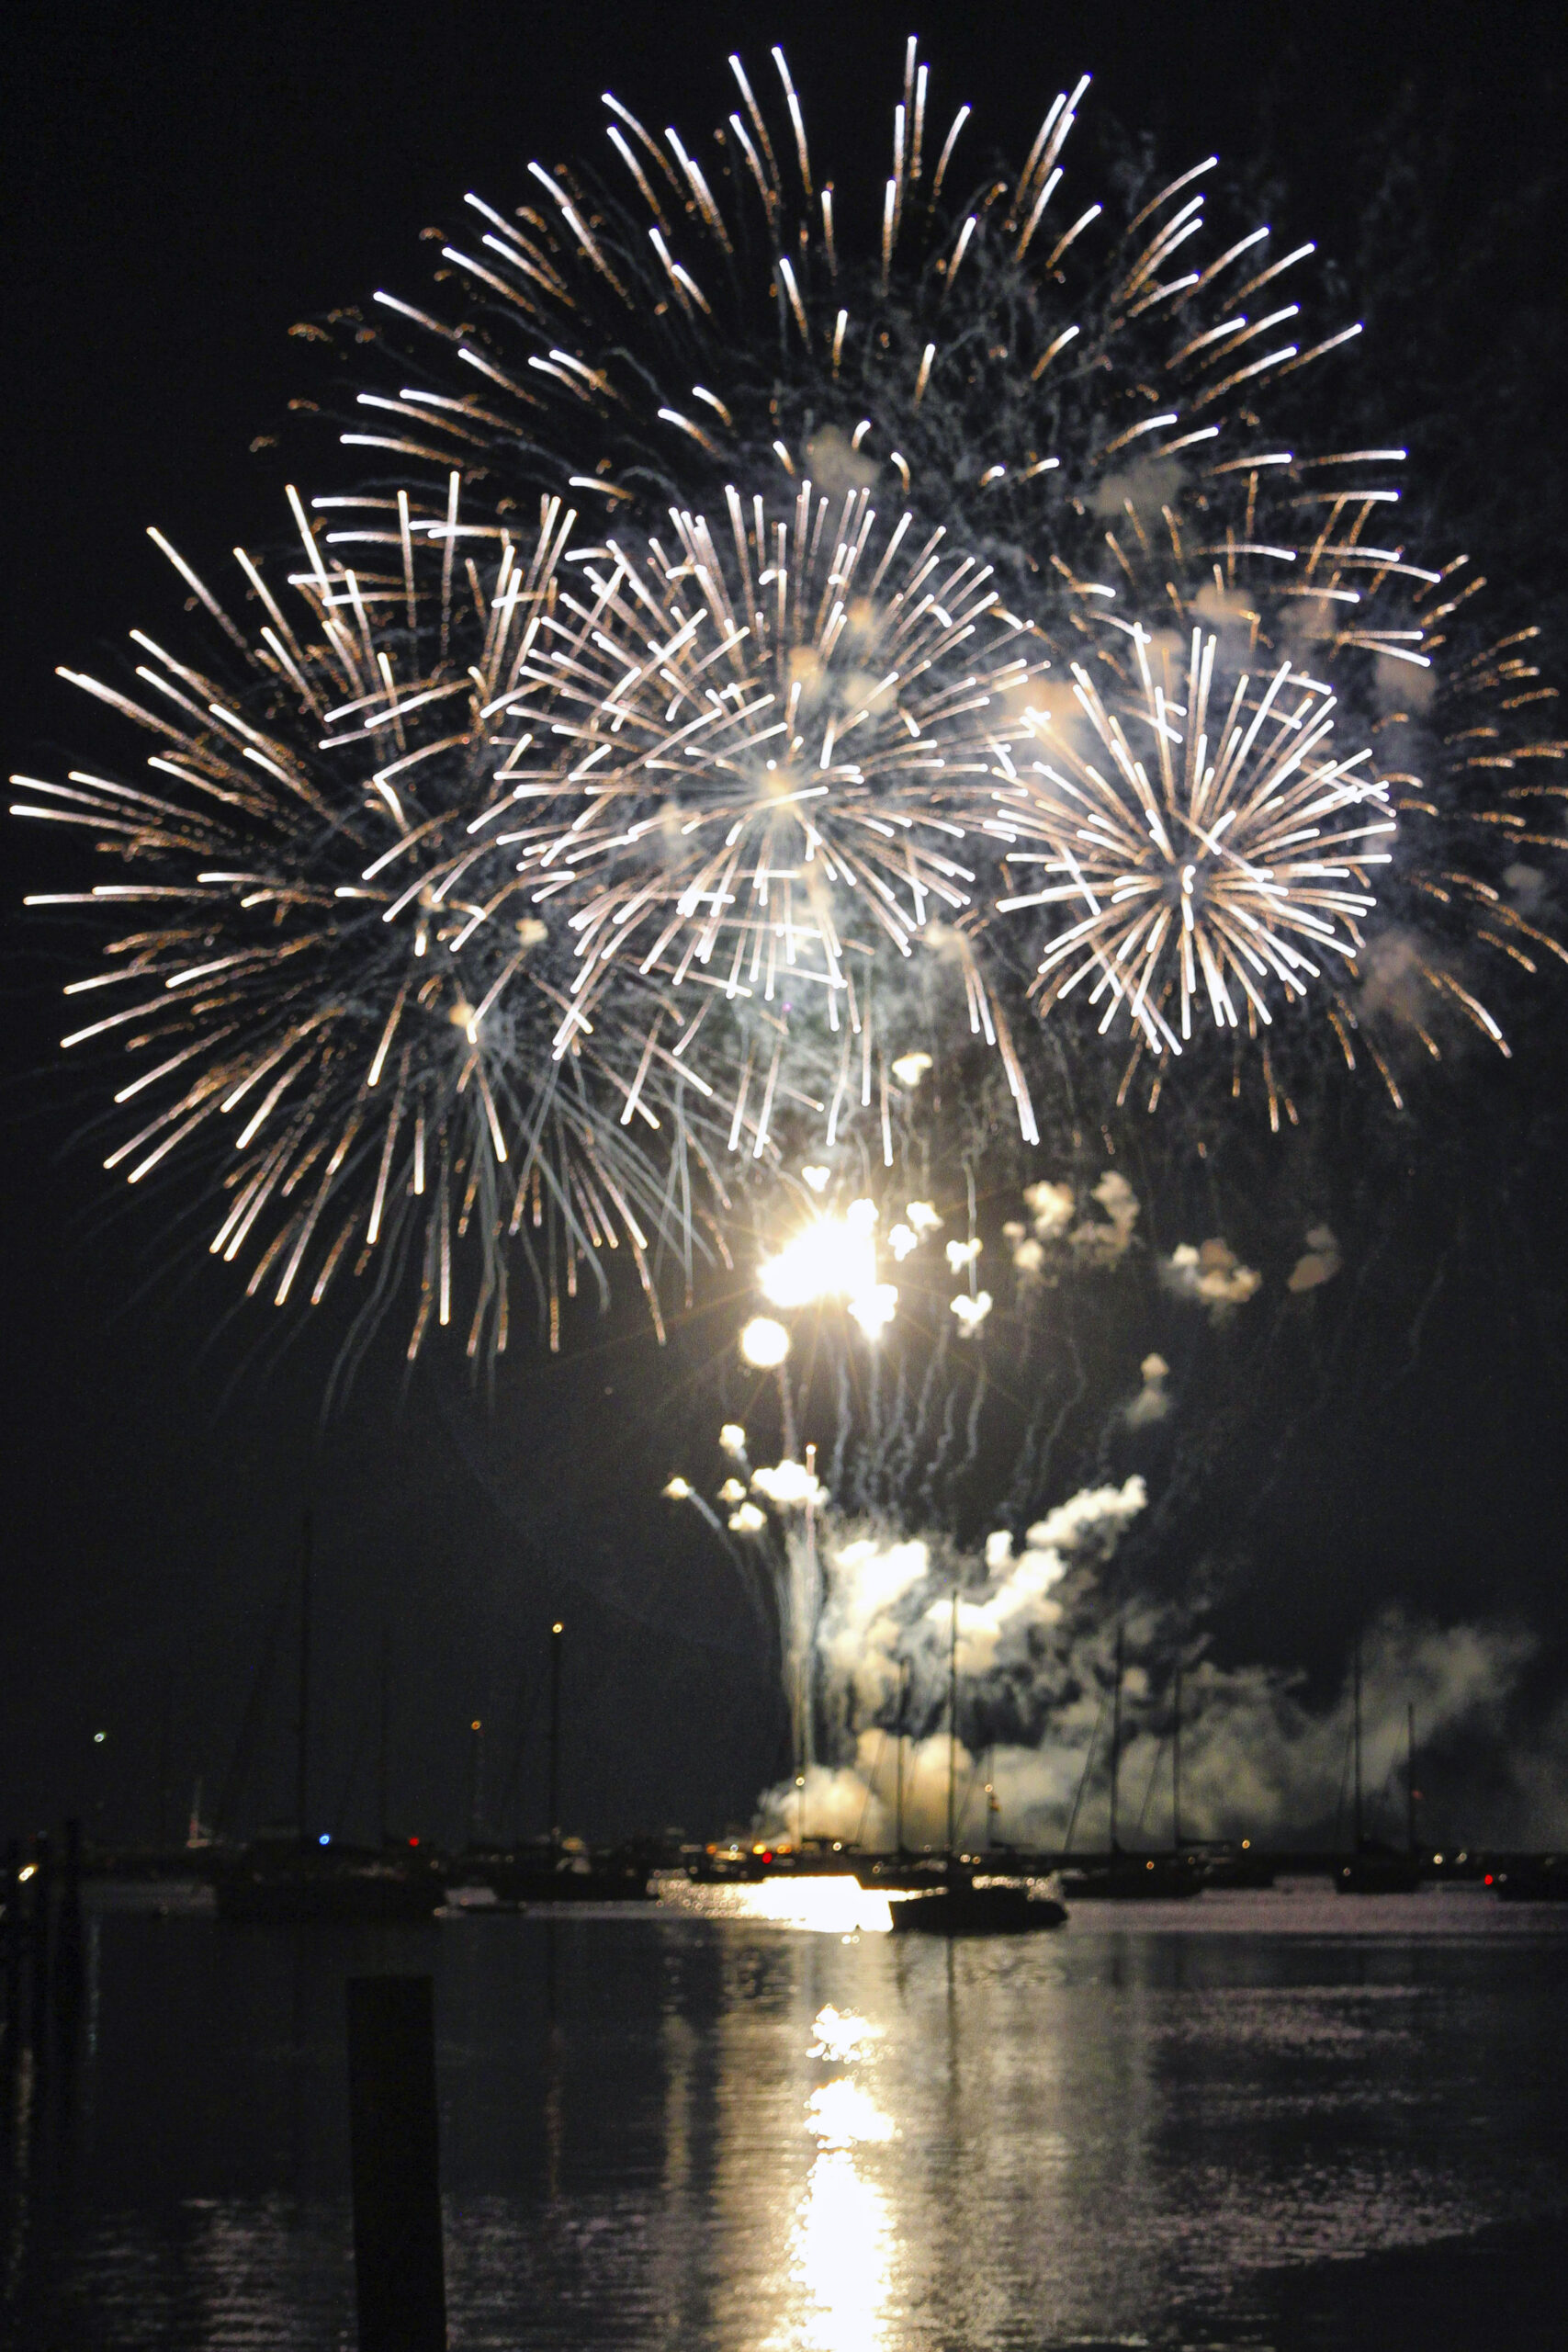 The annual John A. Ward Independence Day Fireworks show in Sag Harbor on Sunday.